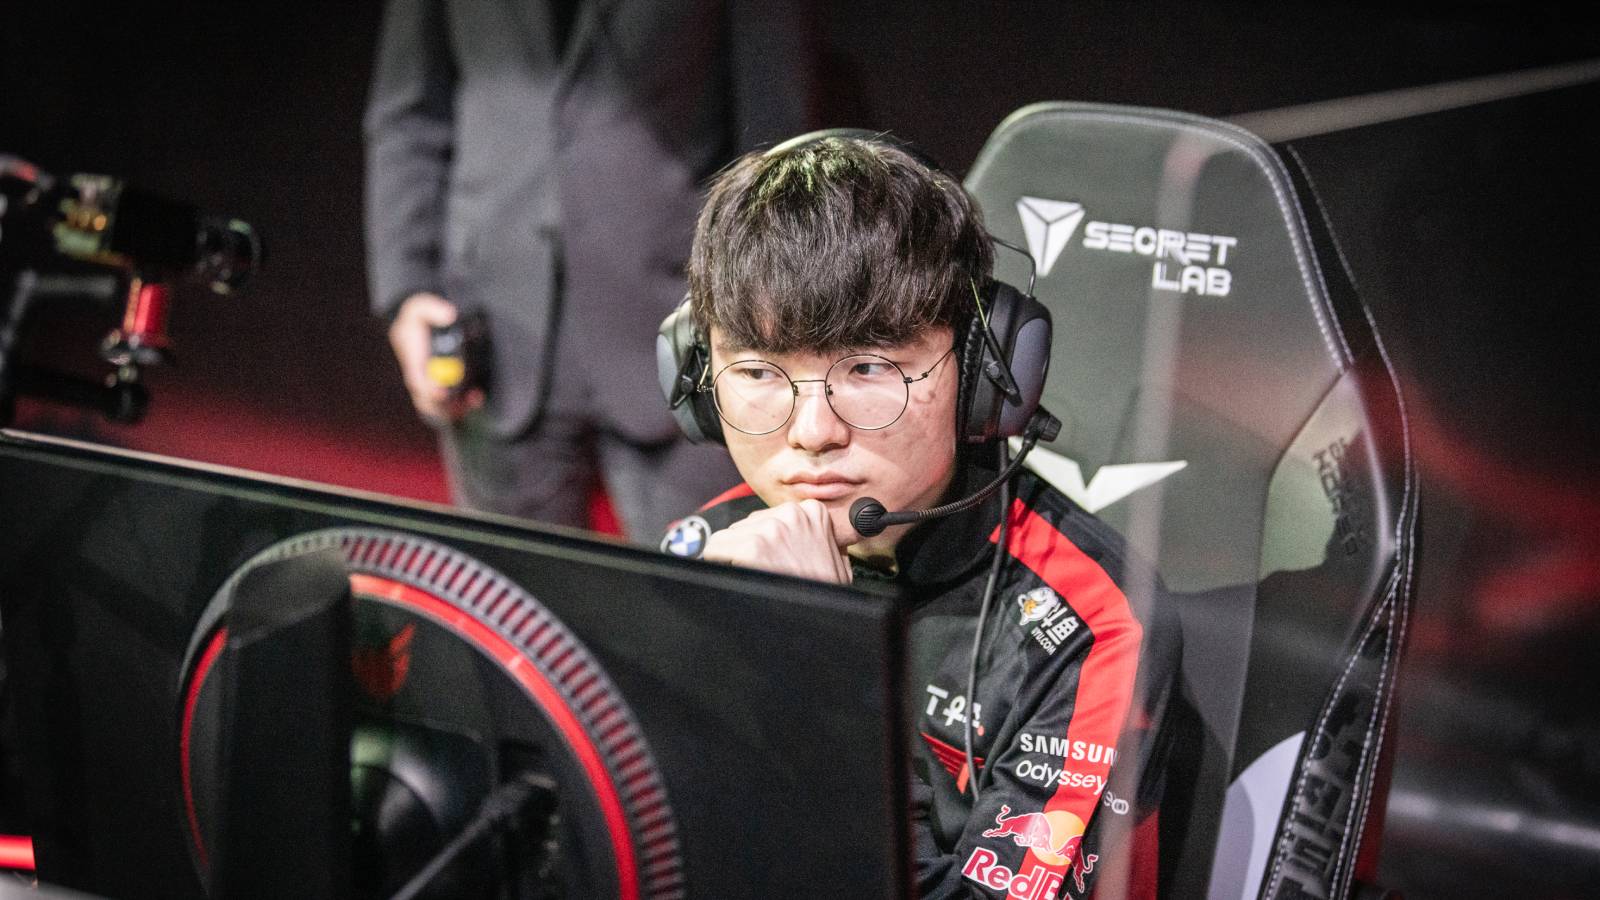 Faker says he can't focus on League of Legends due to his packed schedule